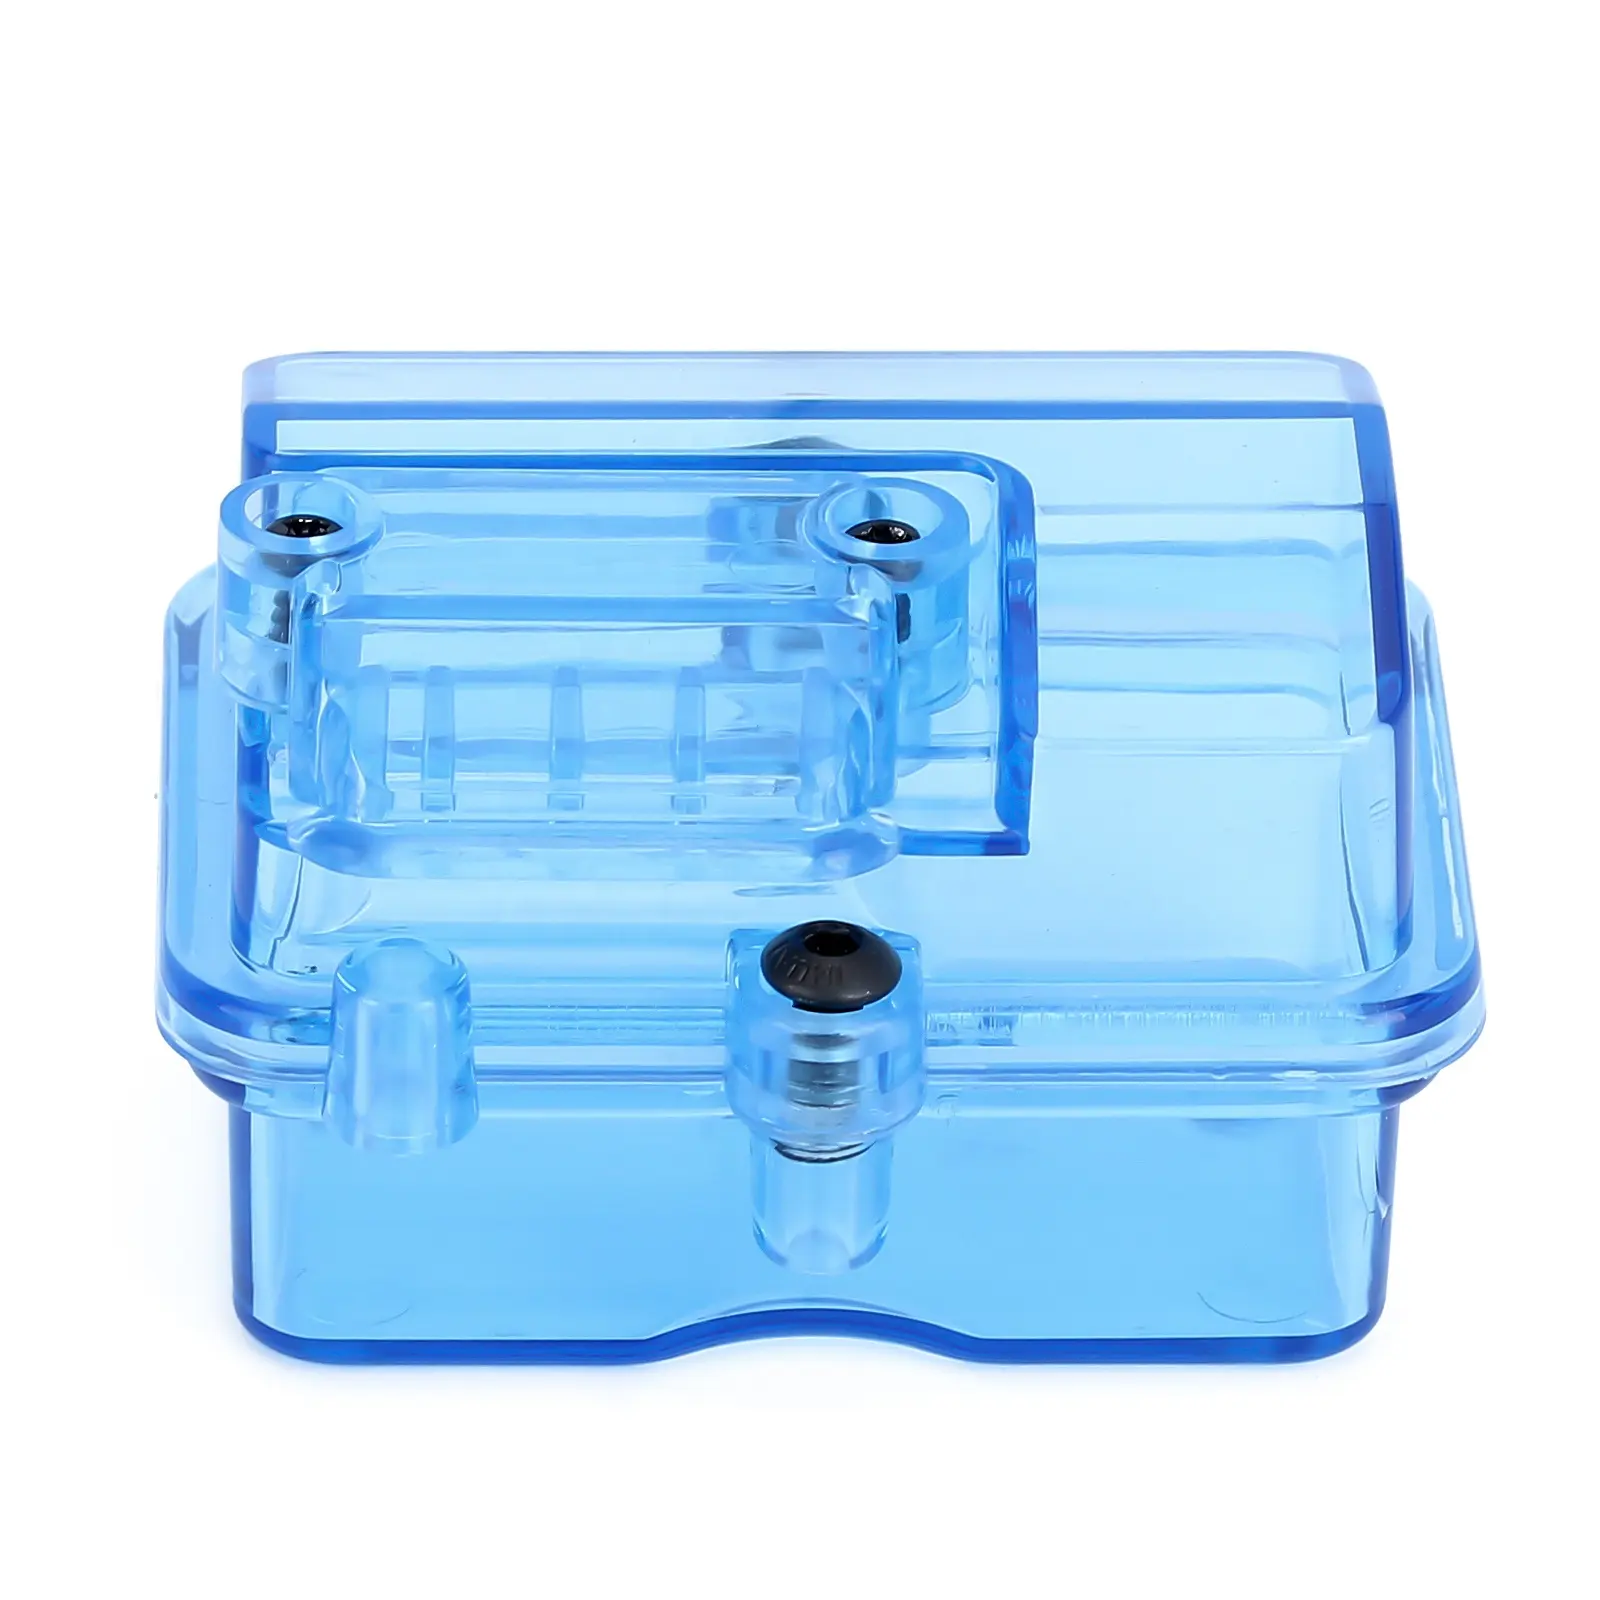 1PCS Blue Plastic Waterproof Radio Device Receiver Box For 1/10 RC Car Parts Rc Accessories